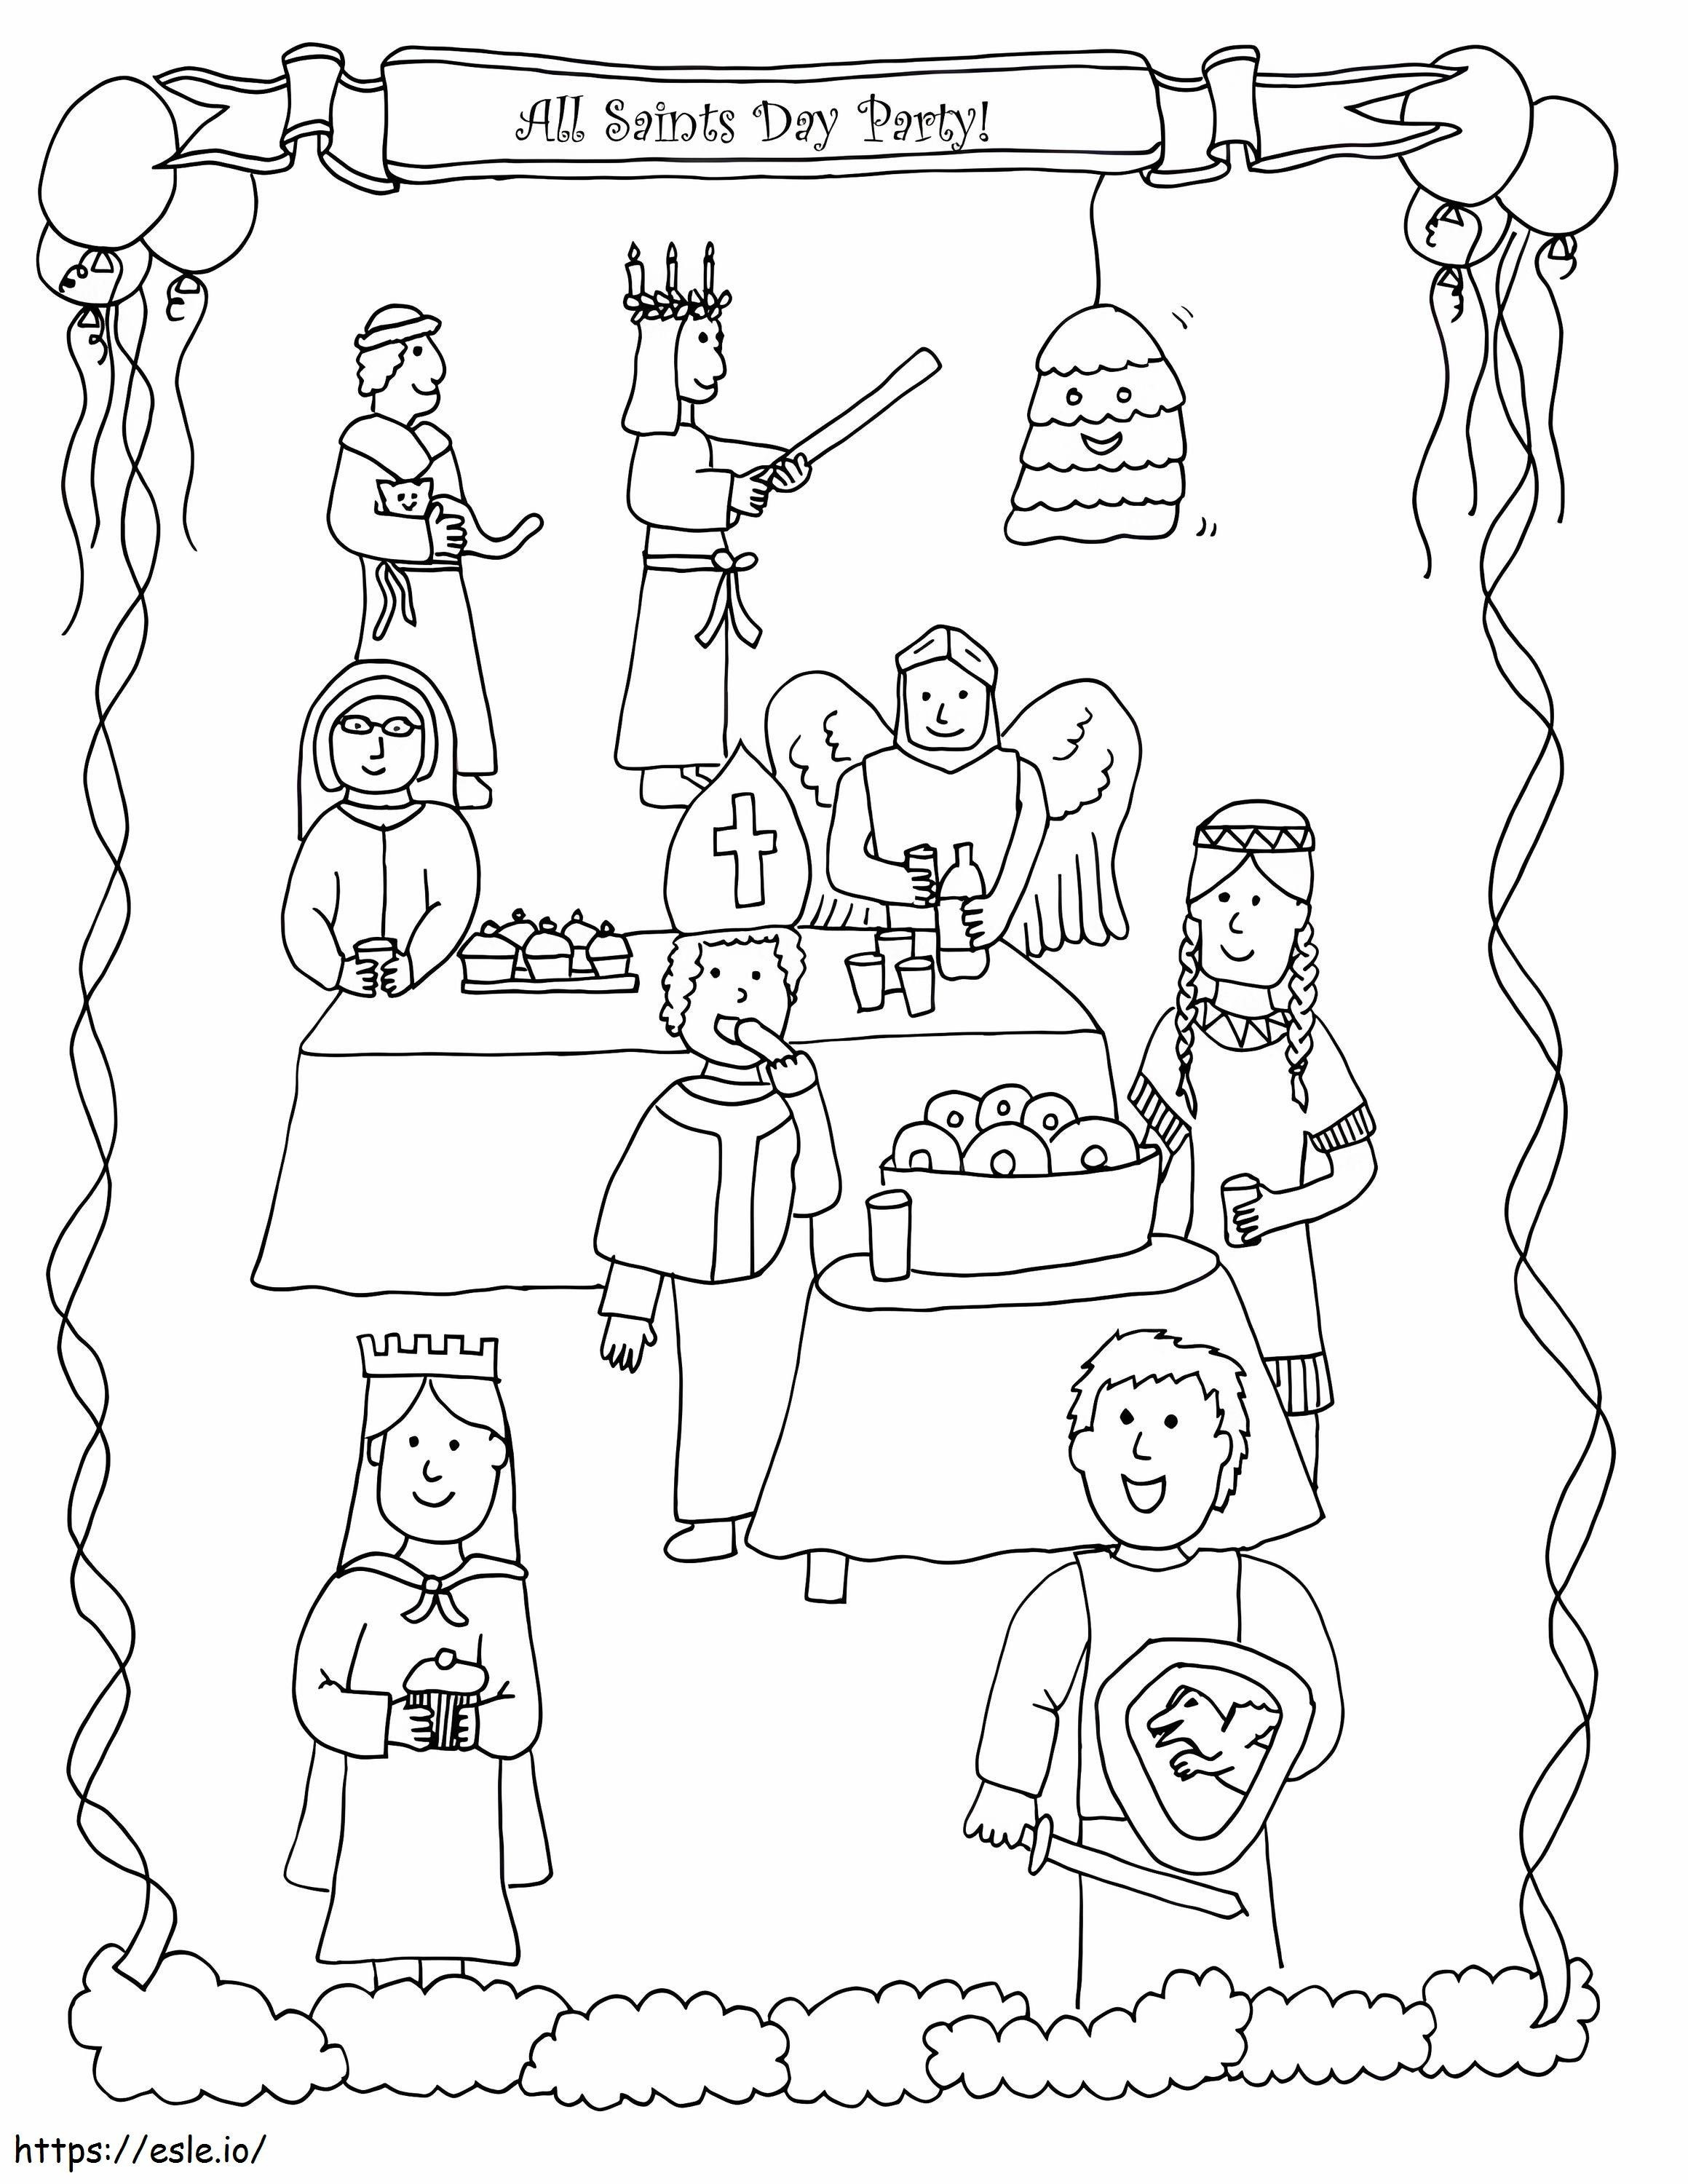 All Saints Day Party coloring page